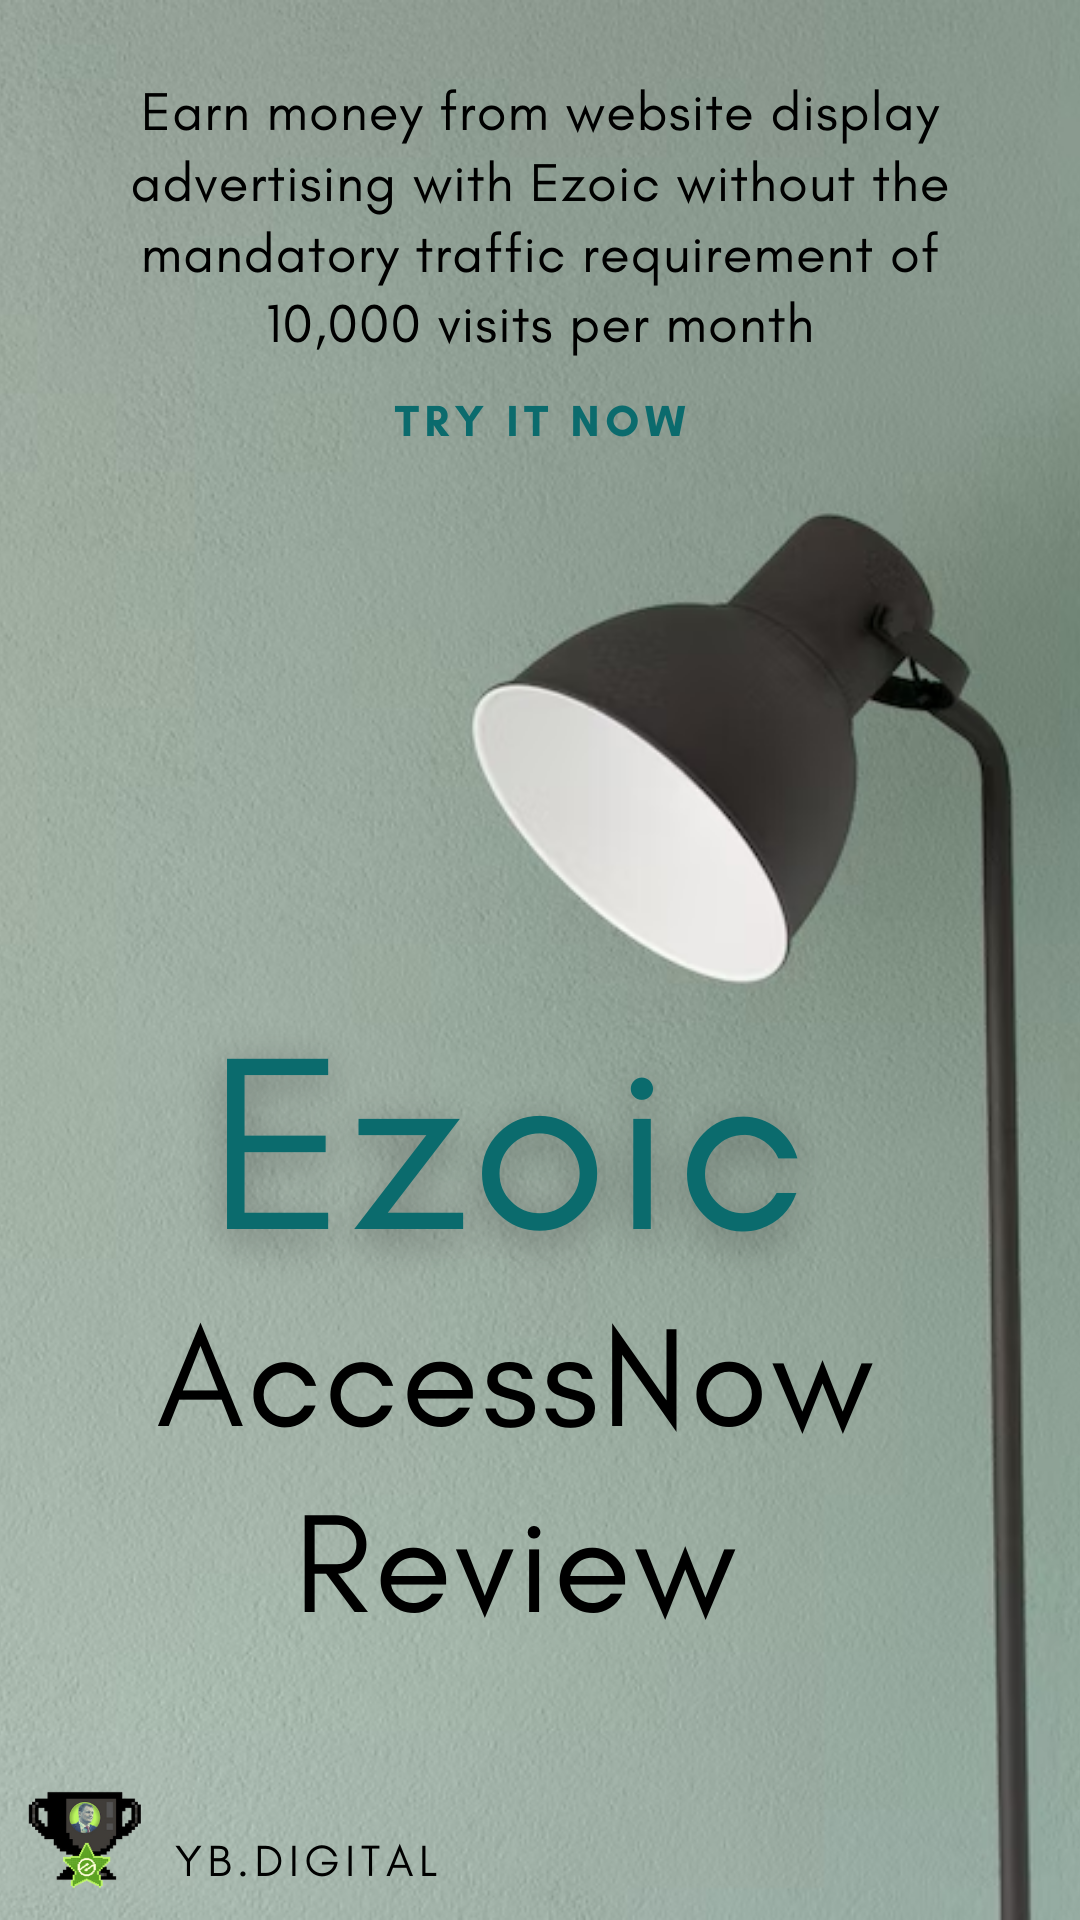 Ezoic AccessNow is a new service that allows you to earn money from website display ads using Ezoic without the mandatory traffic requirement of 10,000 monthly visits. Anyone can connect to this program, but you just need to comply with the content policy.